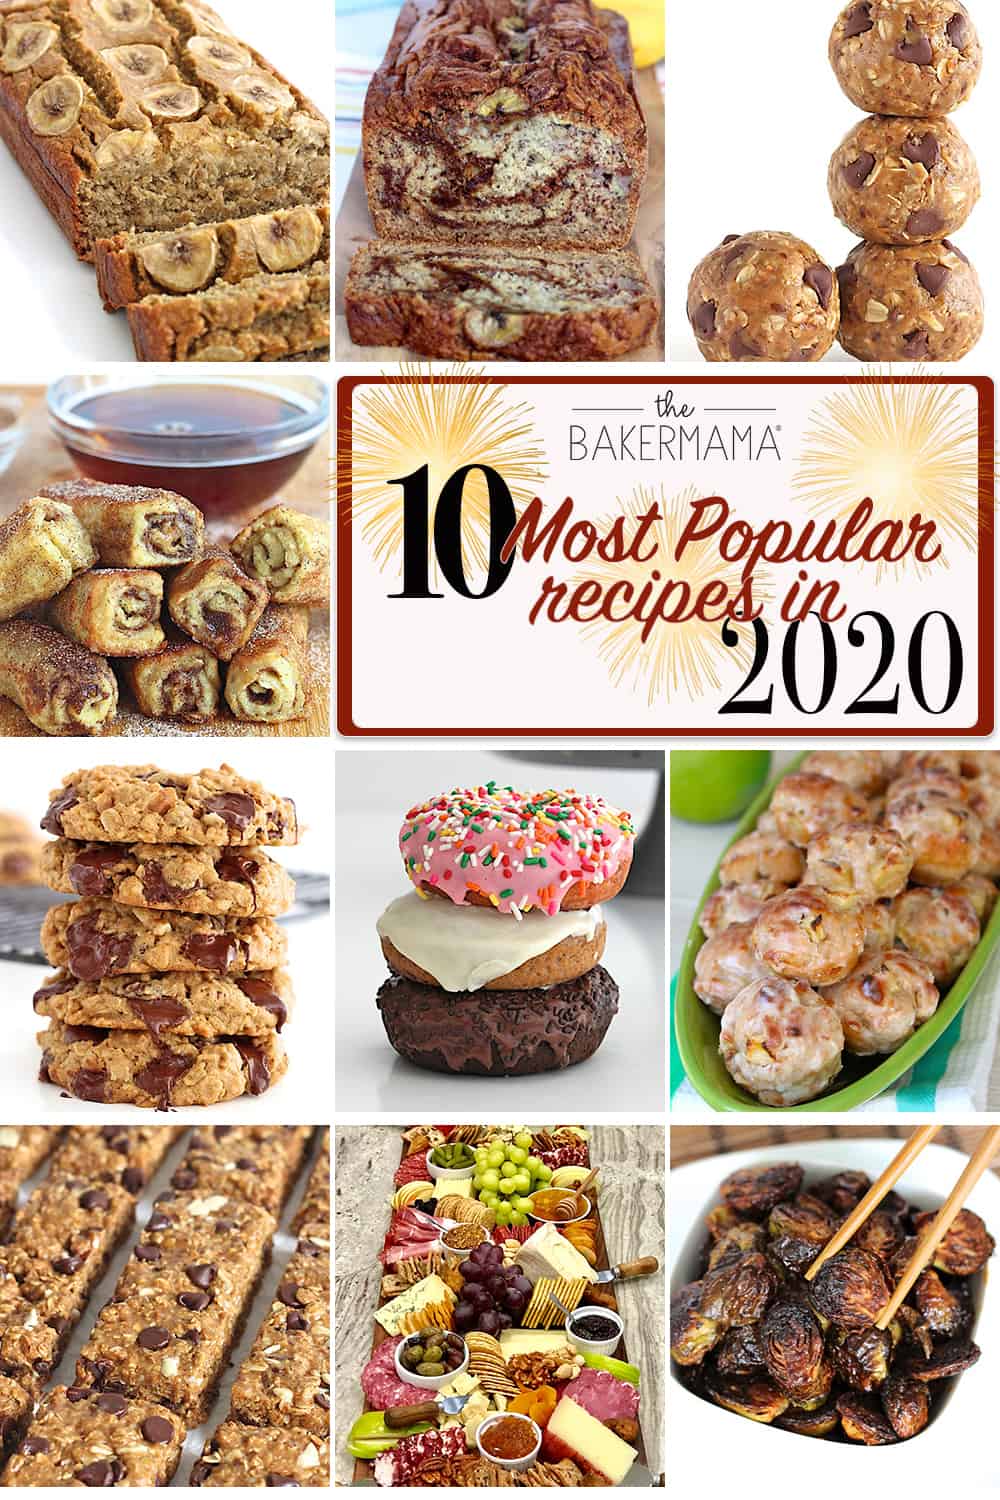 The BakerMama's 10 Most Popular Recipes of 2020